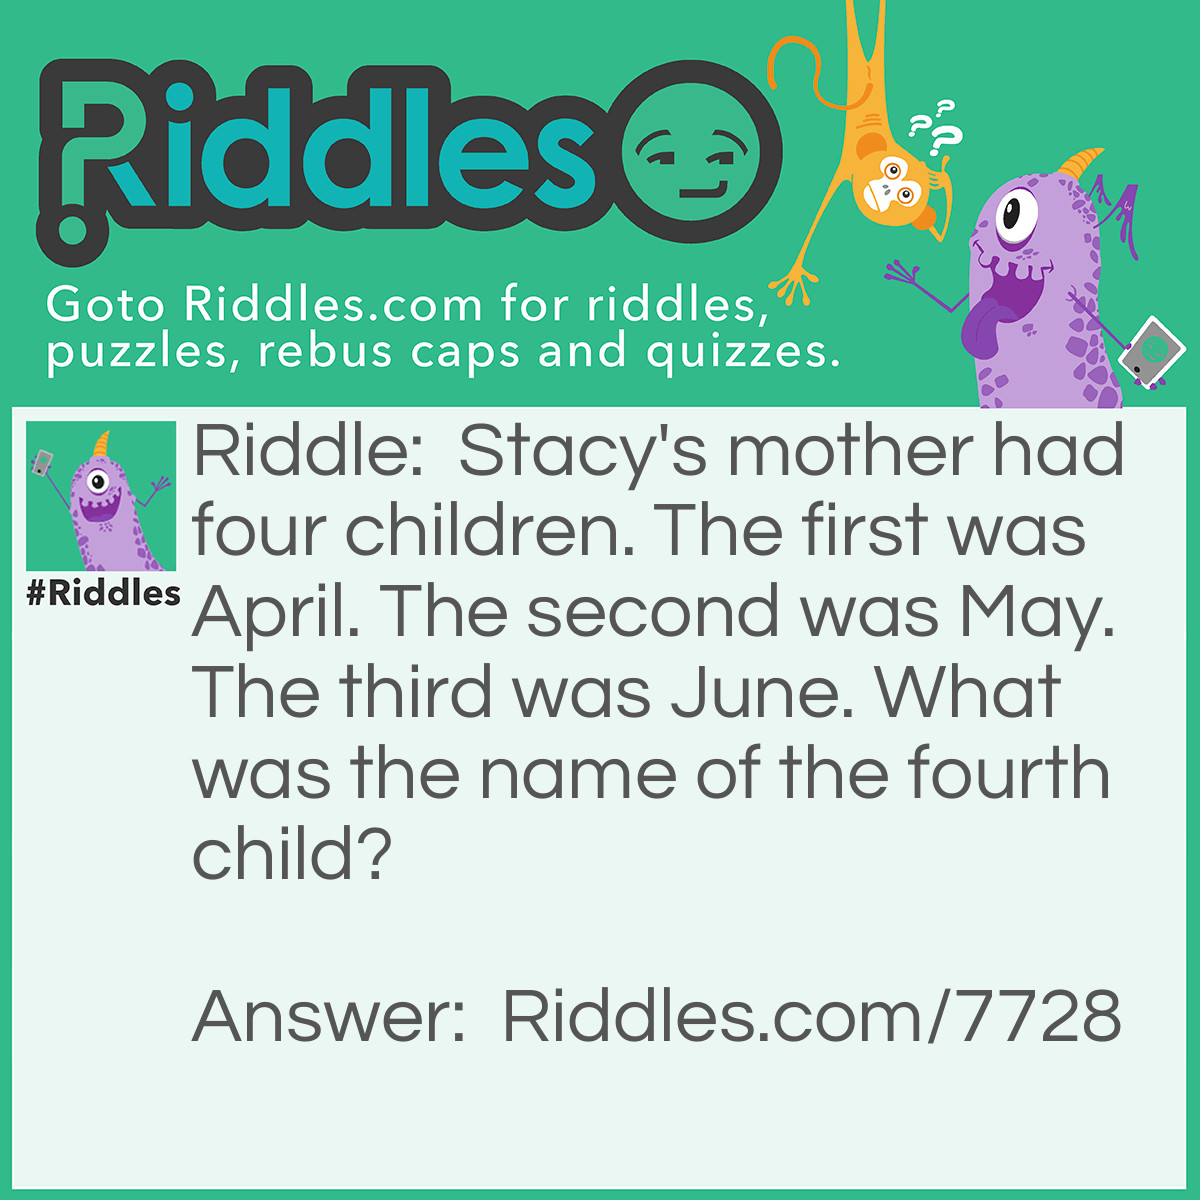 Riddle: Stacy's mother had four children. The first was April. The second was May. The third was June. What was the name of the fourth child? Answer: Stacy!!! GOTCHA!!! ;)